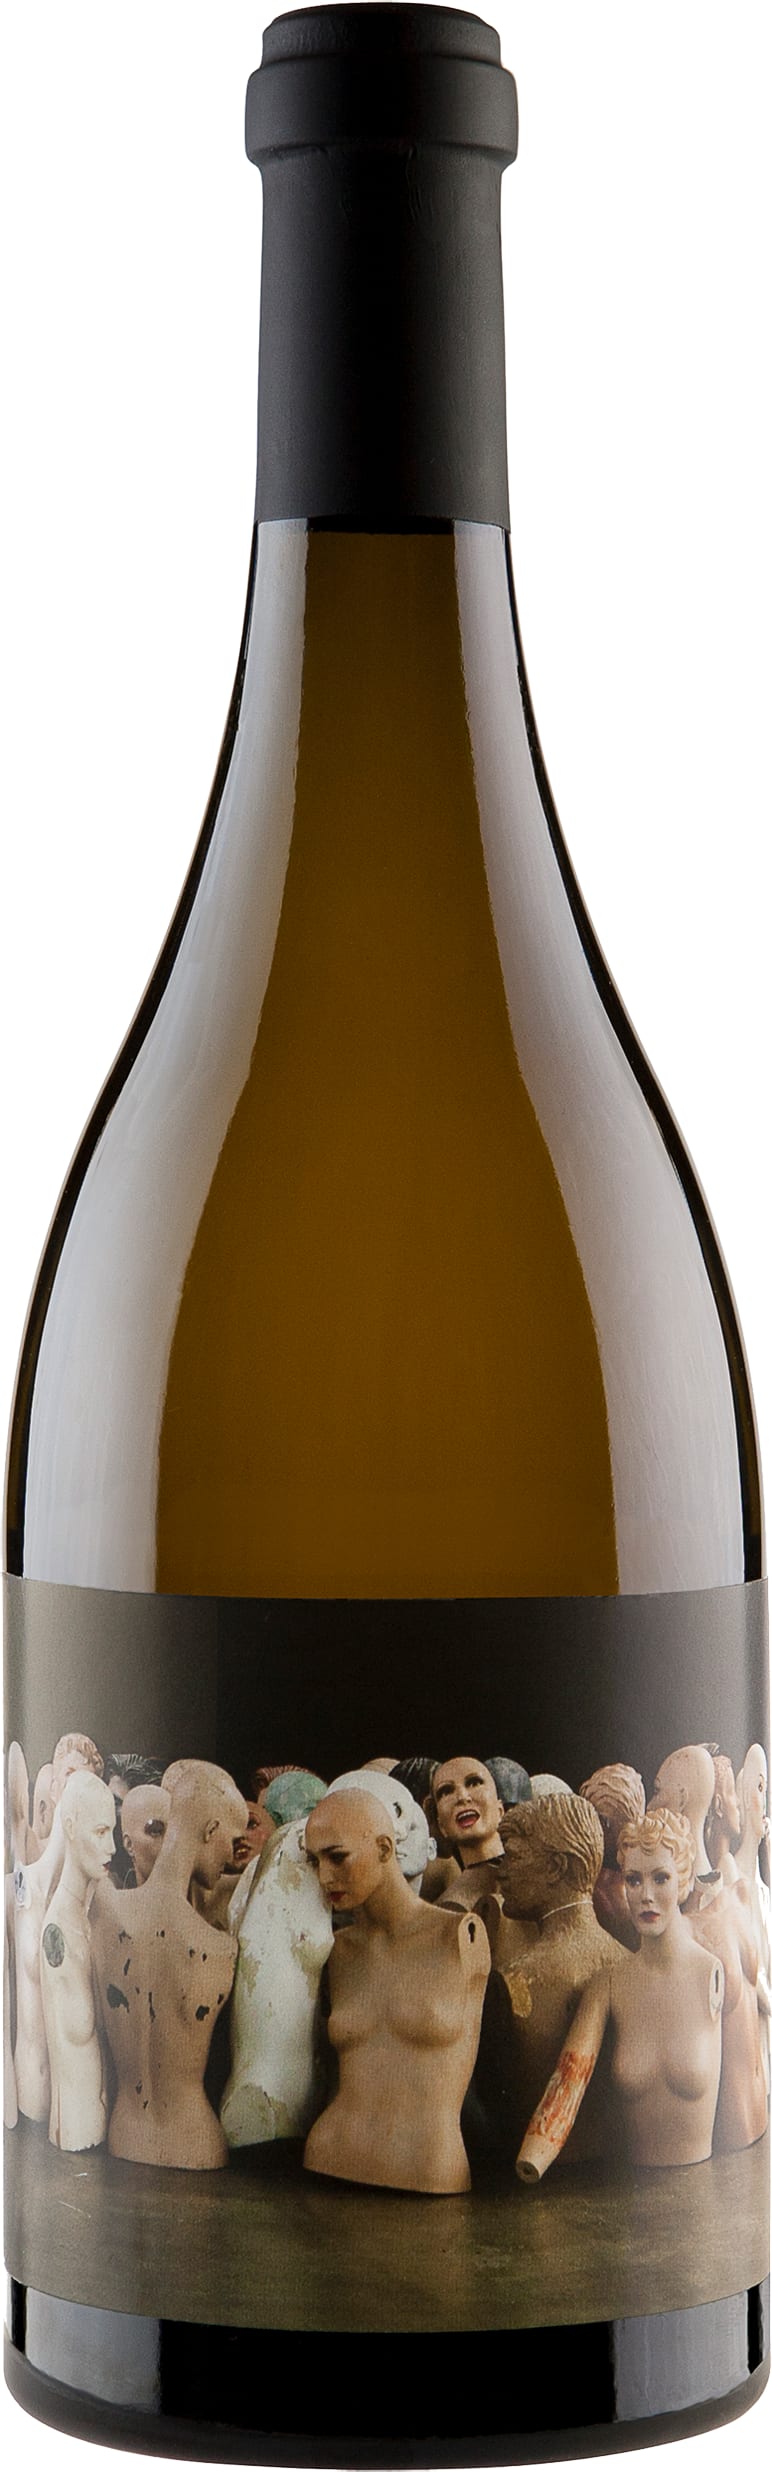 Orin Swift Mannequin Chardonnay 2021 75cl - Buy Orin Swift Wines from GREAT WINES DIRECT wine shop